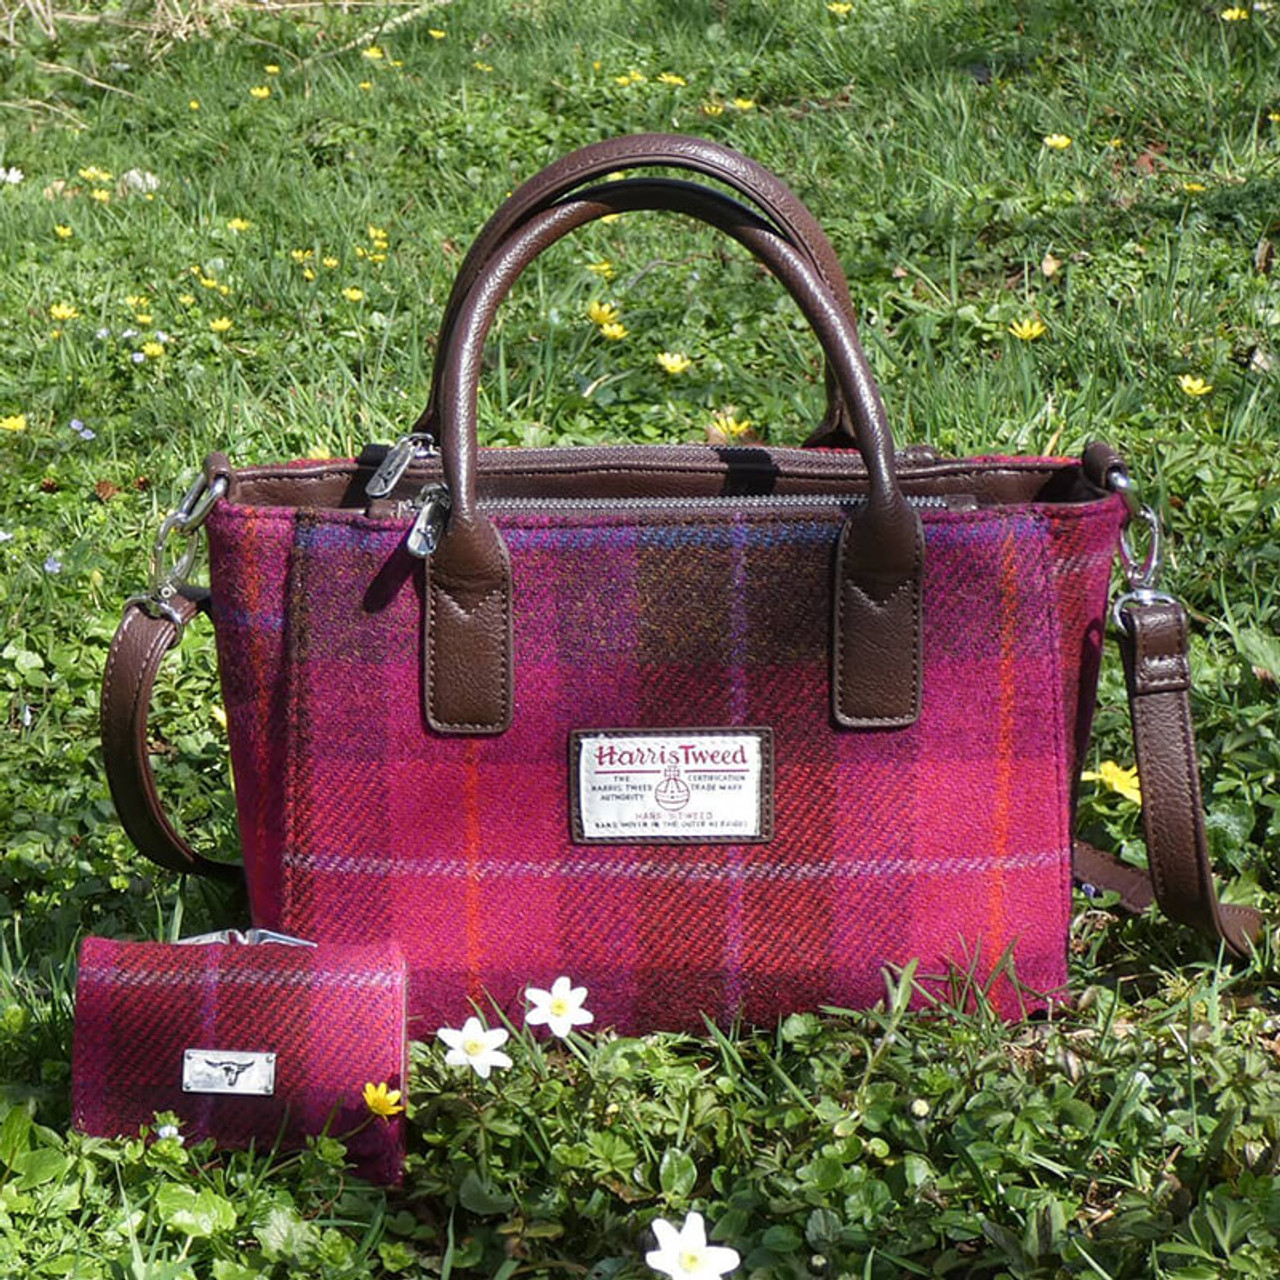 Kelly Tweed & Leather Tote Bag - Green and Pink Plaid